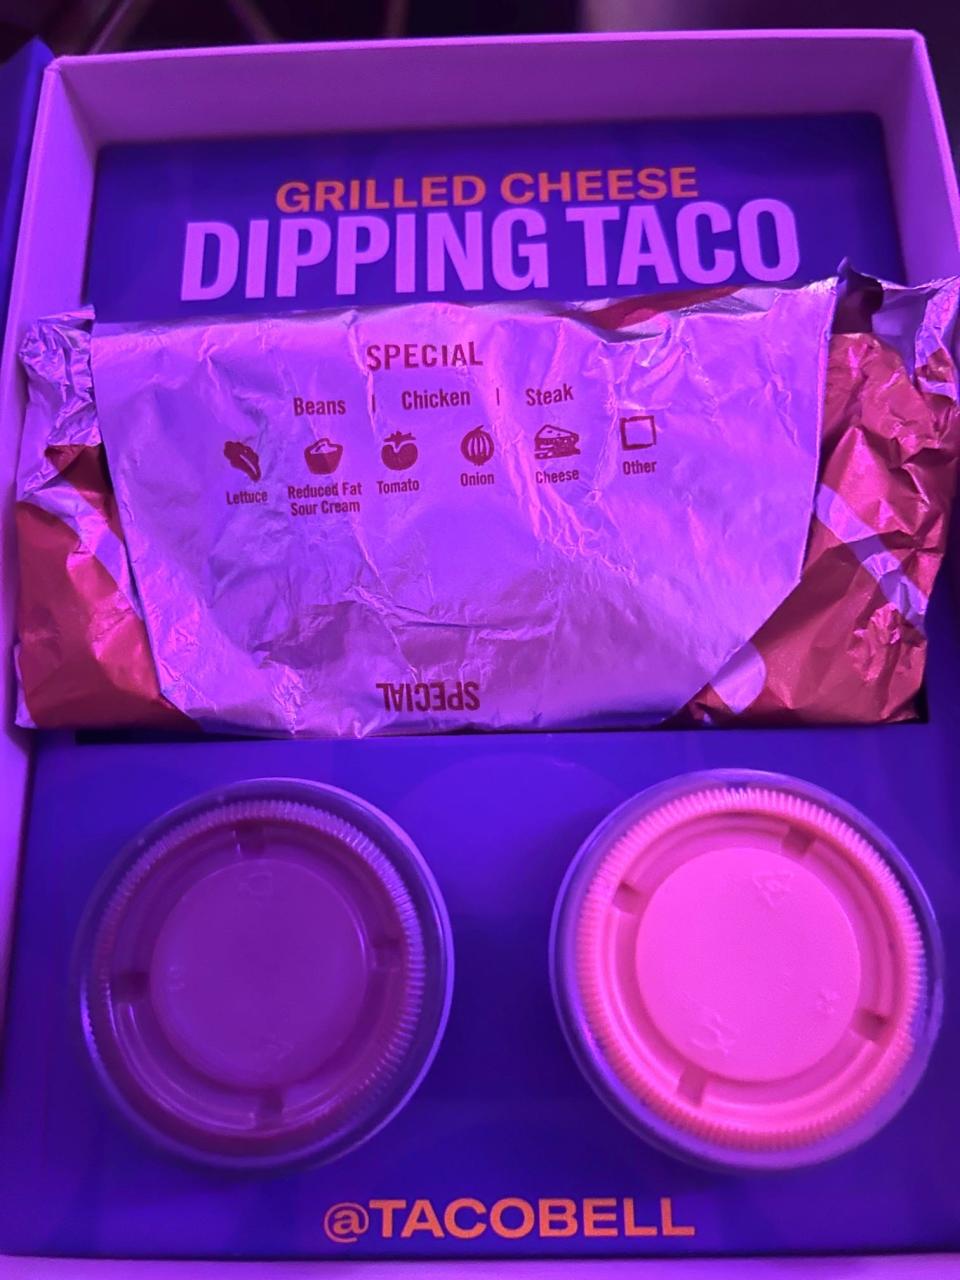 A Taco Bell box containing a Grilled Cheese Dipping Taco with a pot of red sauce and a pot of nacho-cheese sauce